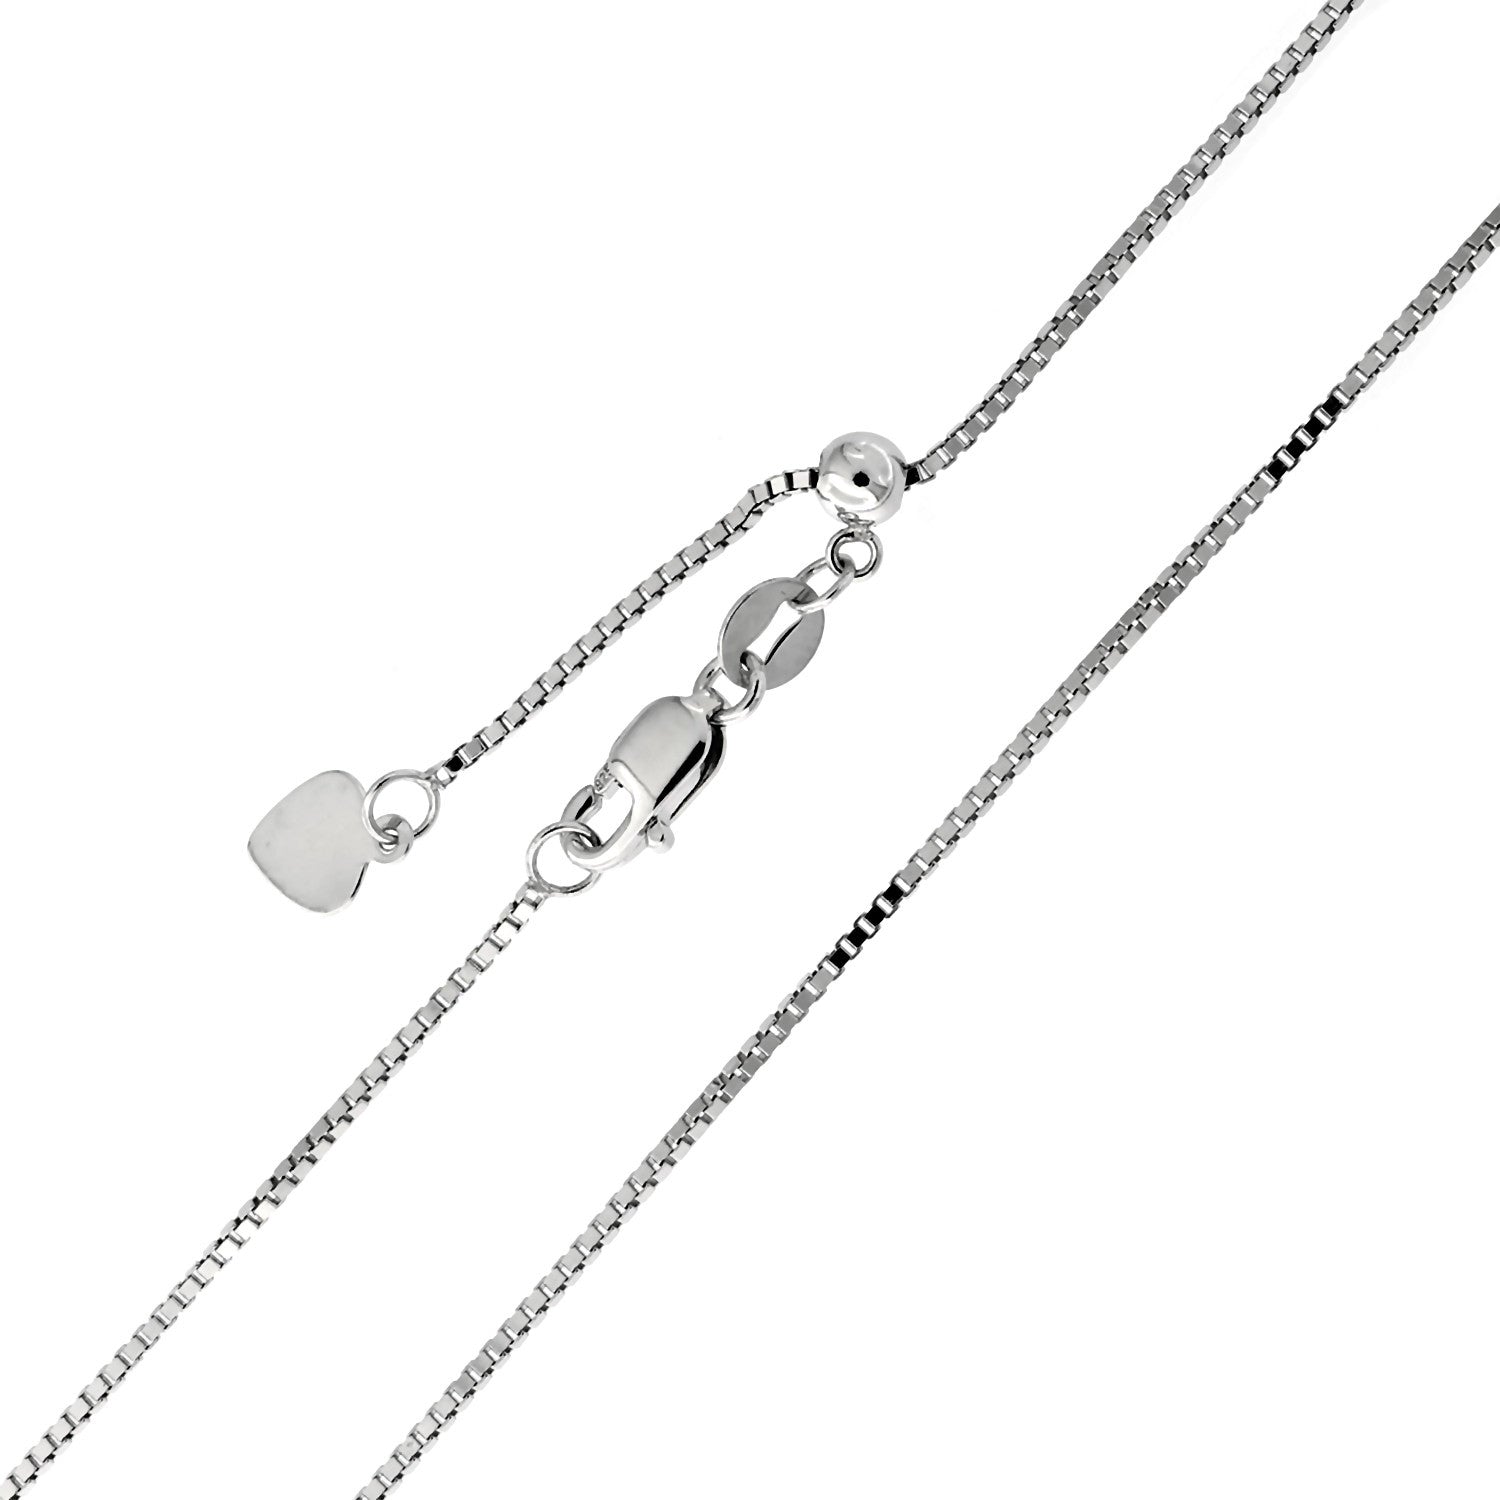 Sterling Silver Chain Necklace 16 - 22 Inches